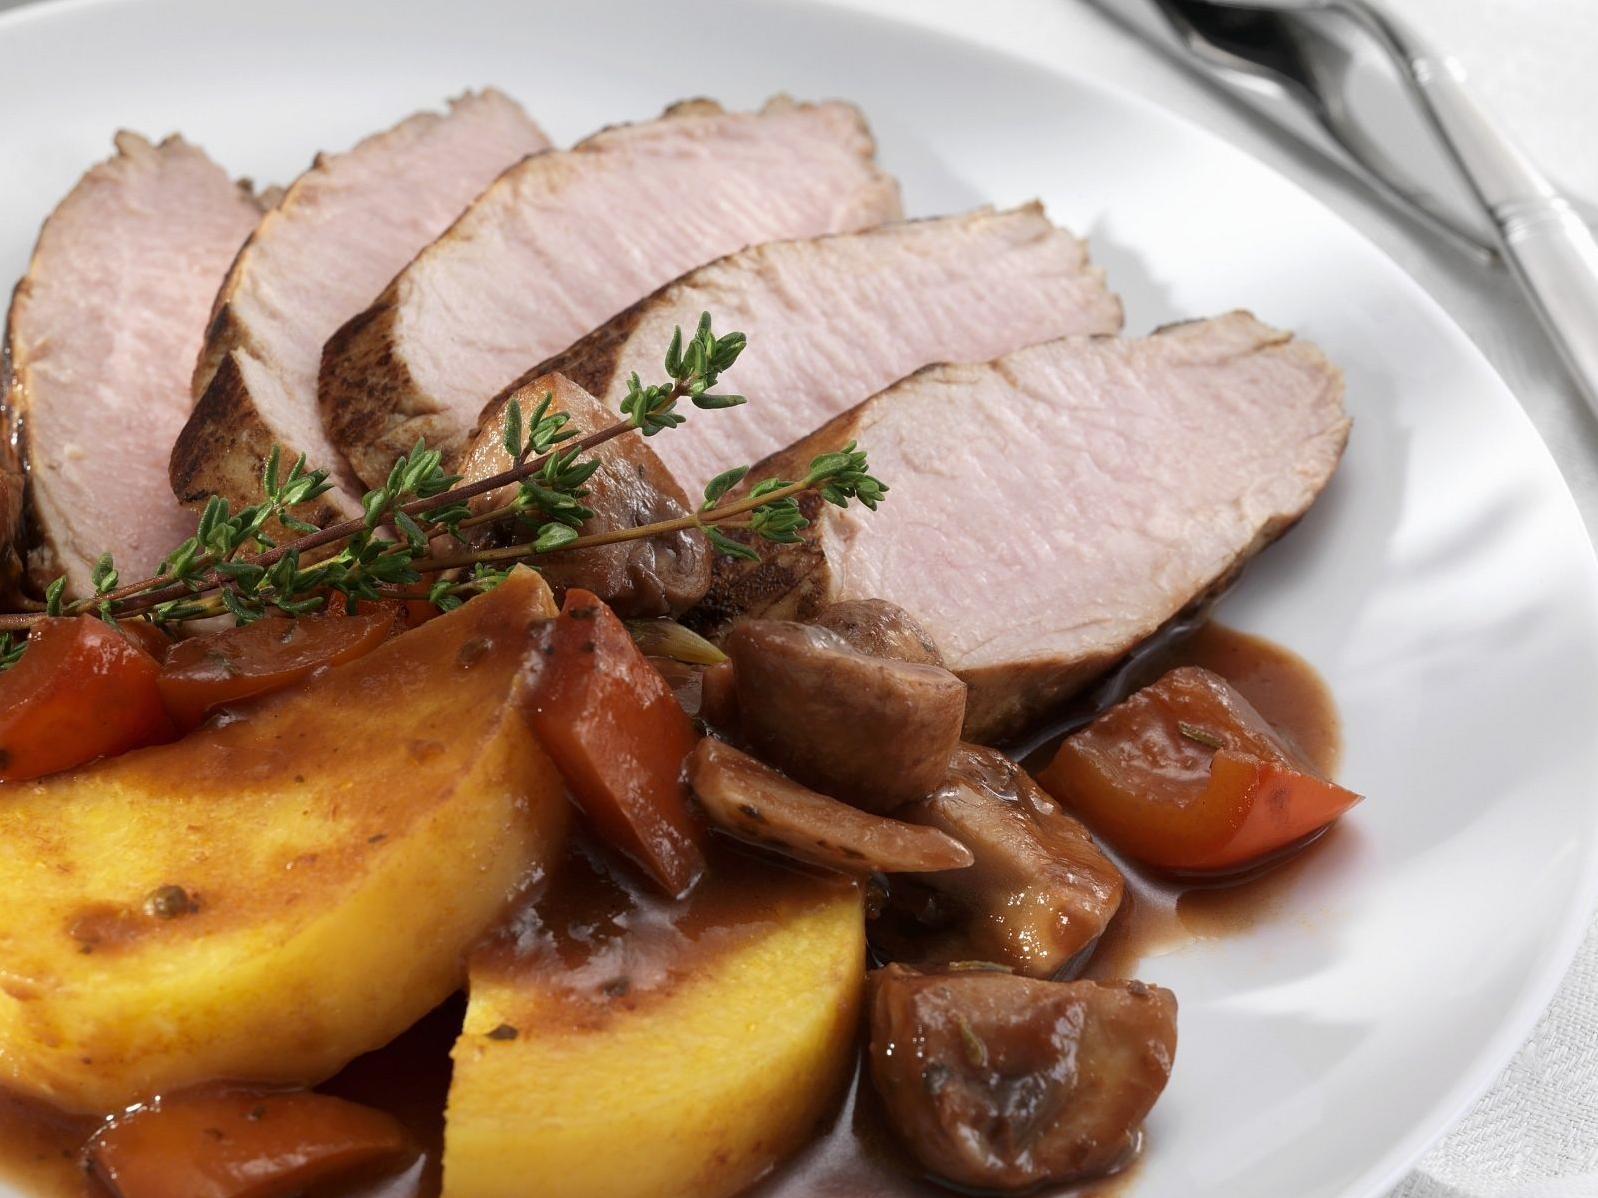  This pork tenderloin dish is so good, it's almost too beautiful for words (Almost).